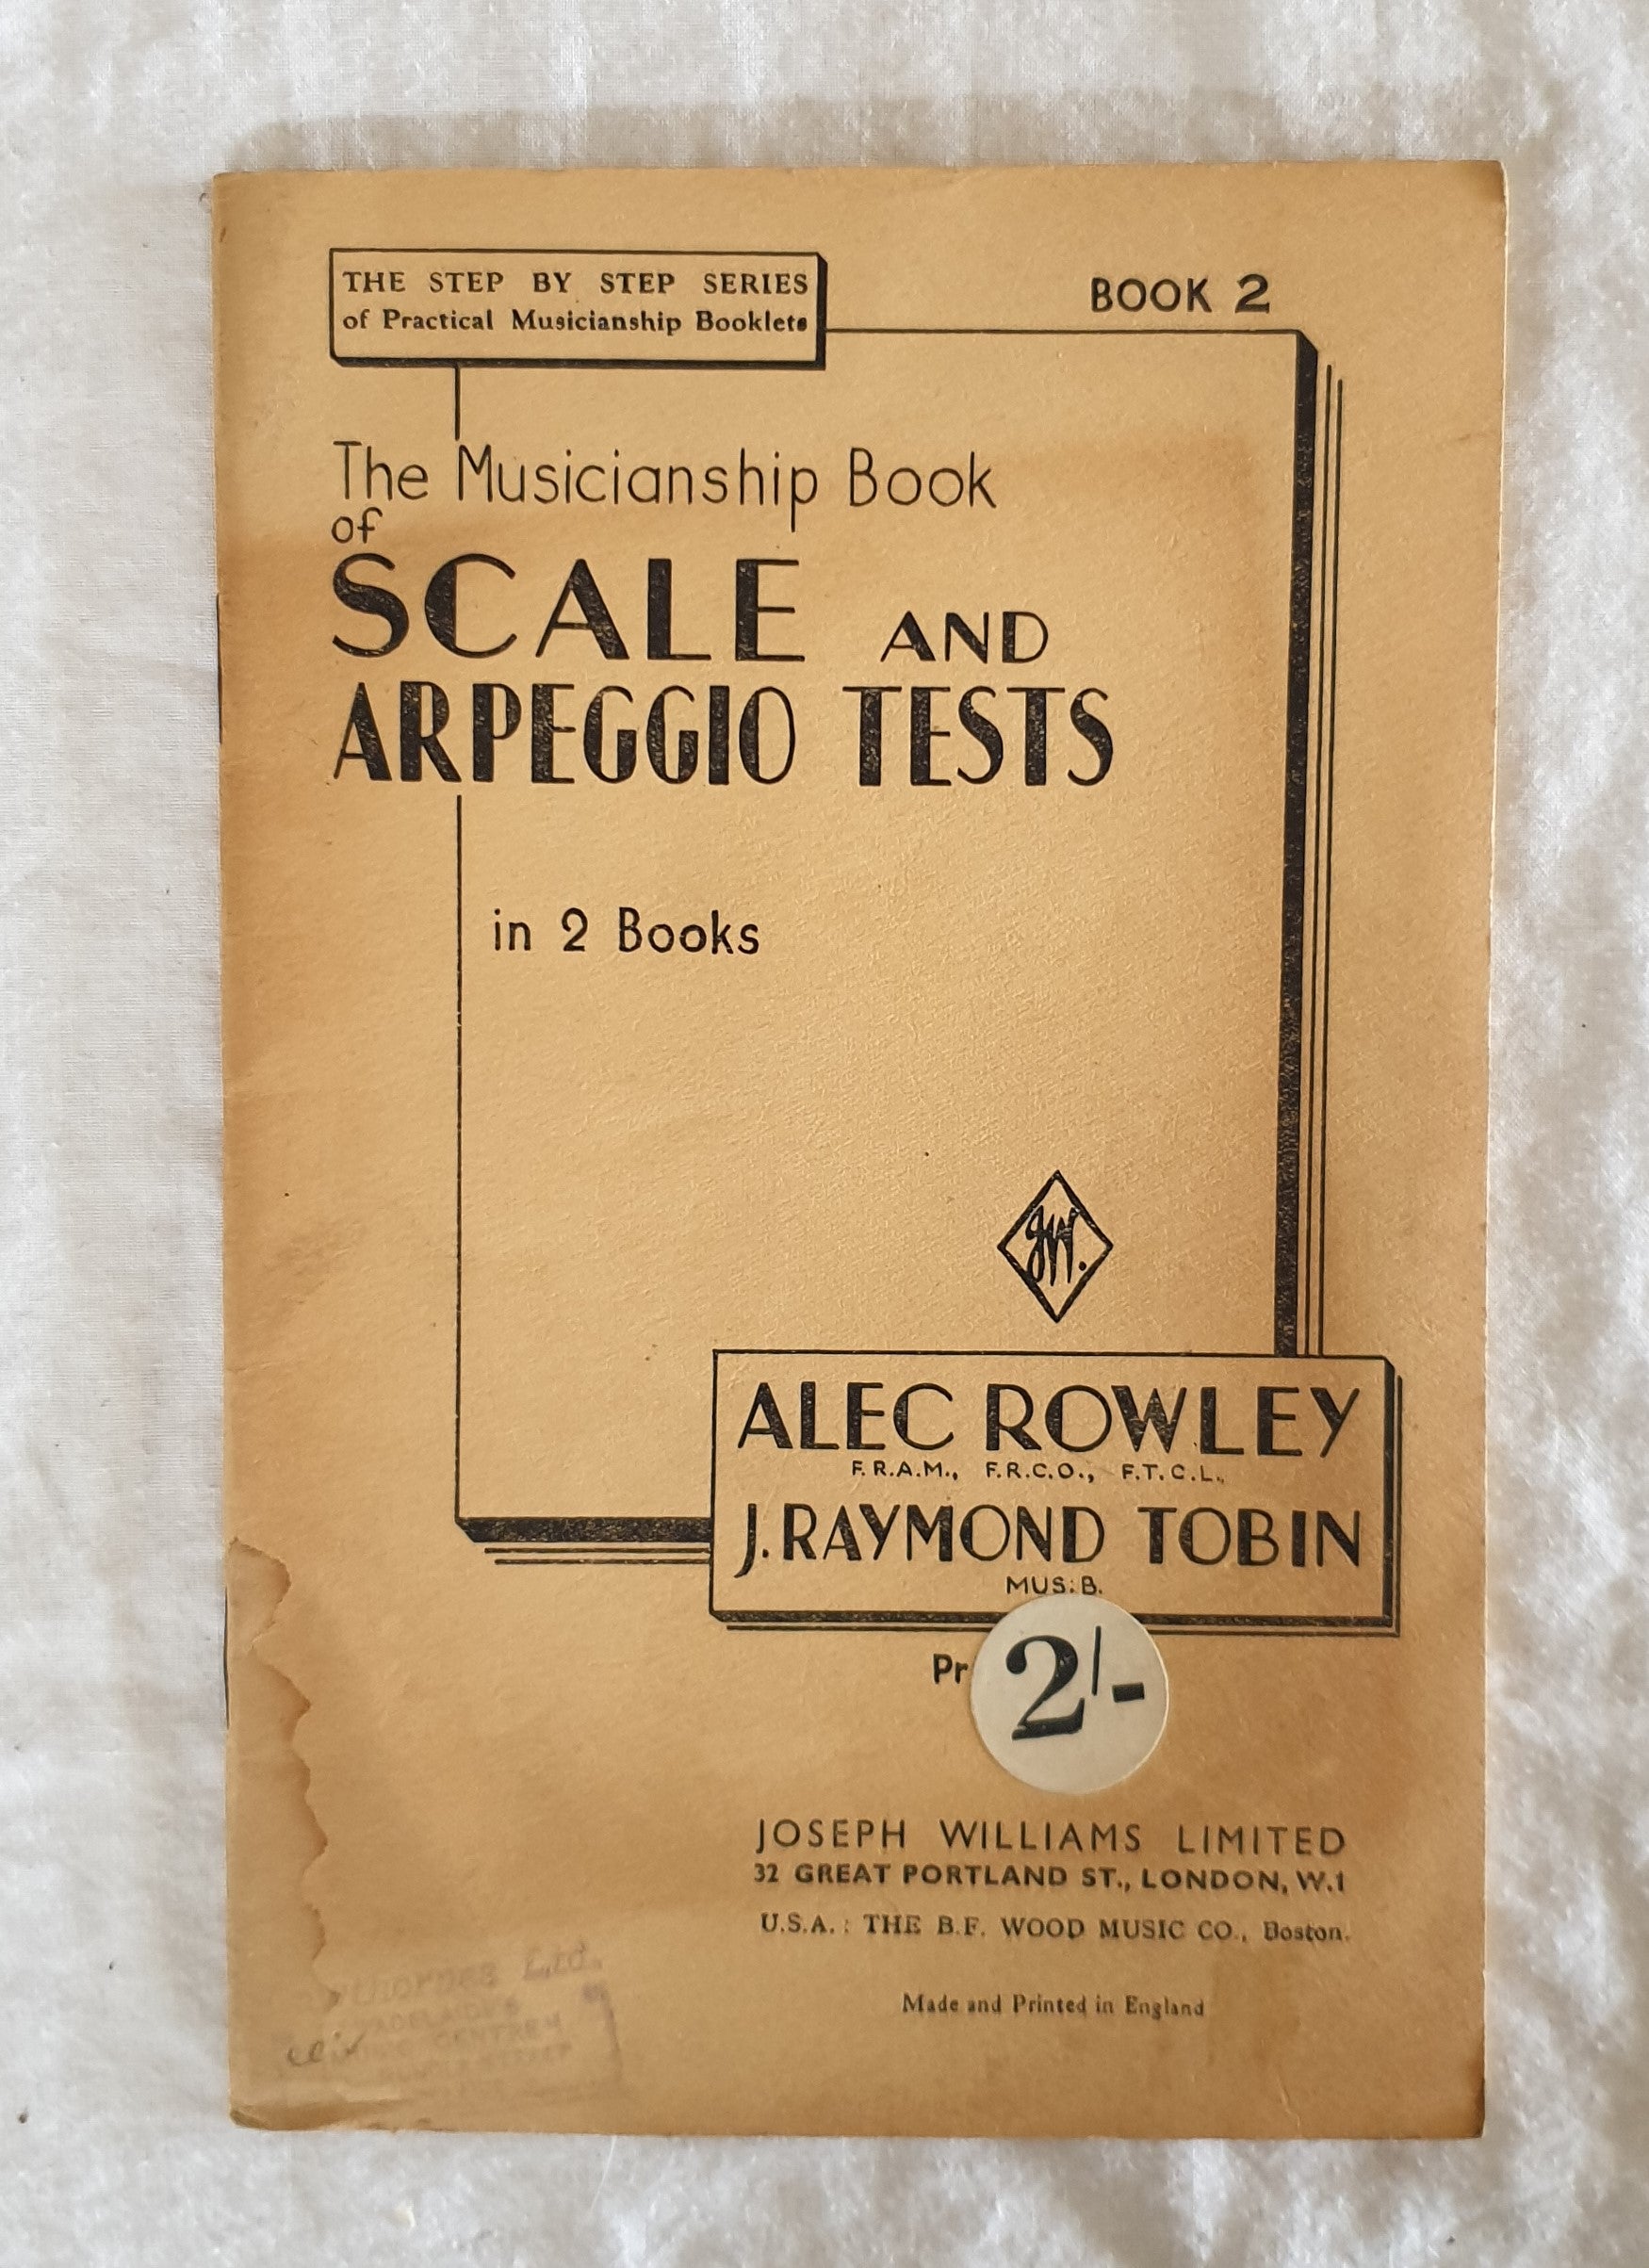 The Musicianship Book of Scale and Arpeggio Tests